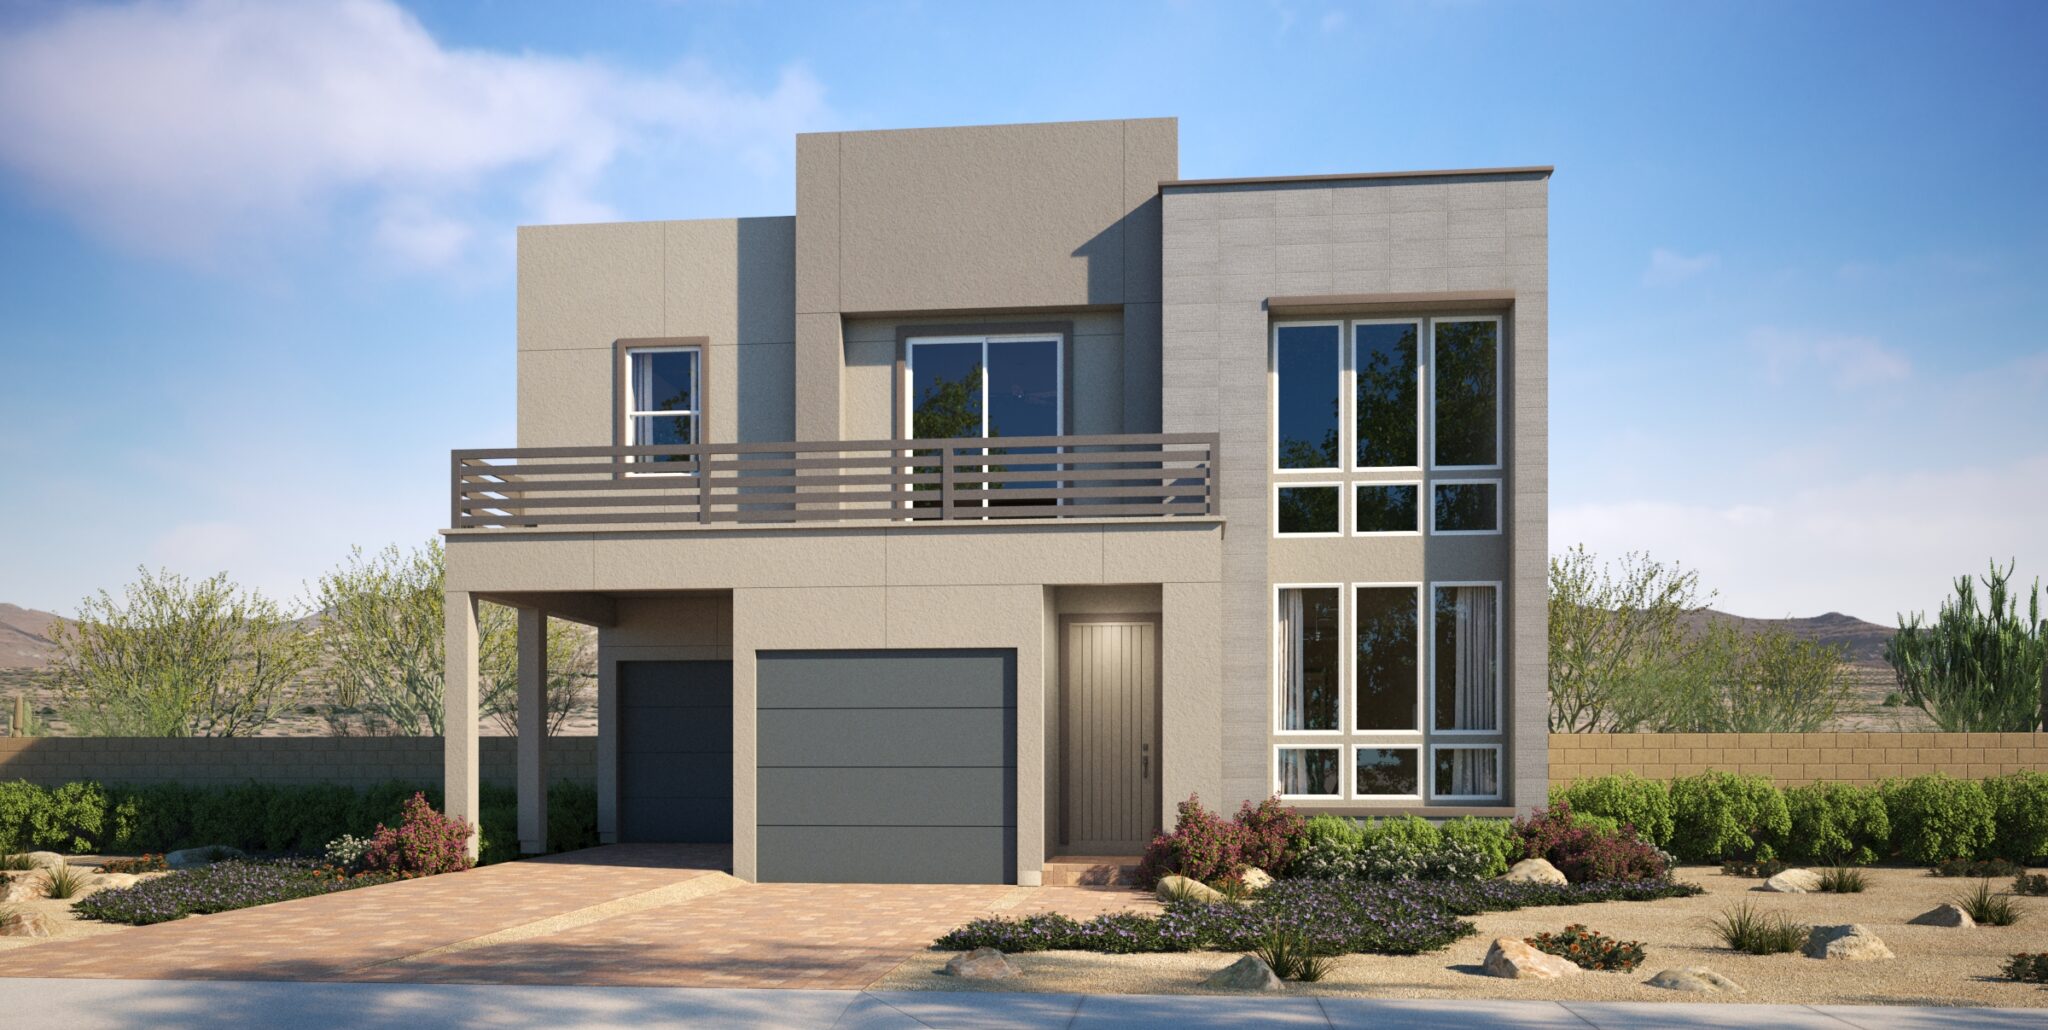 Elevation C of Sage Plan 2 at Vireo by Woodside Homes